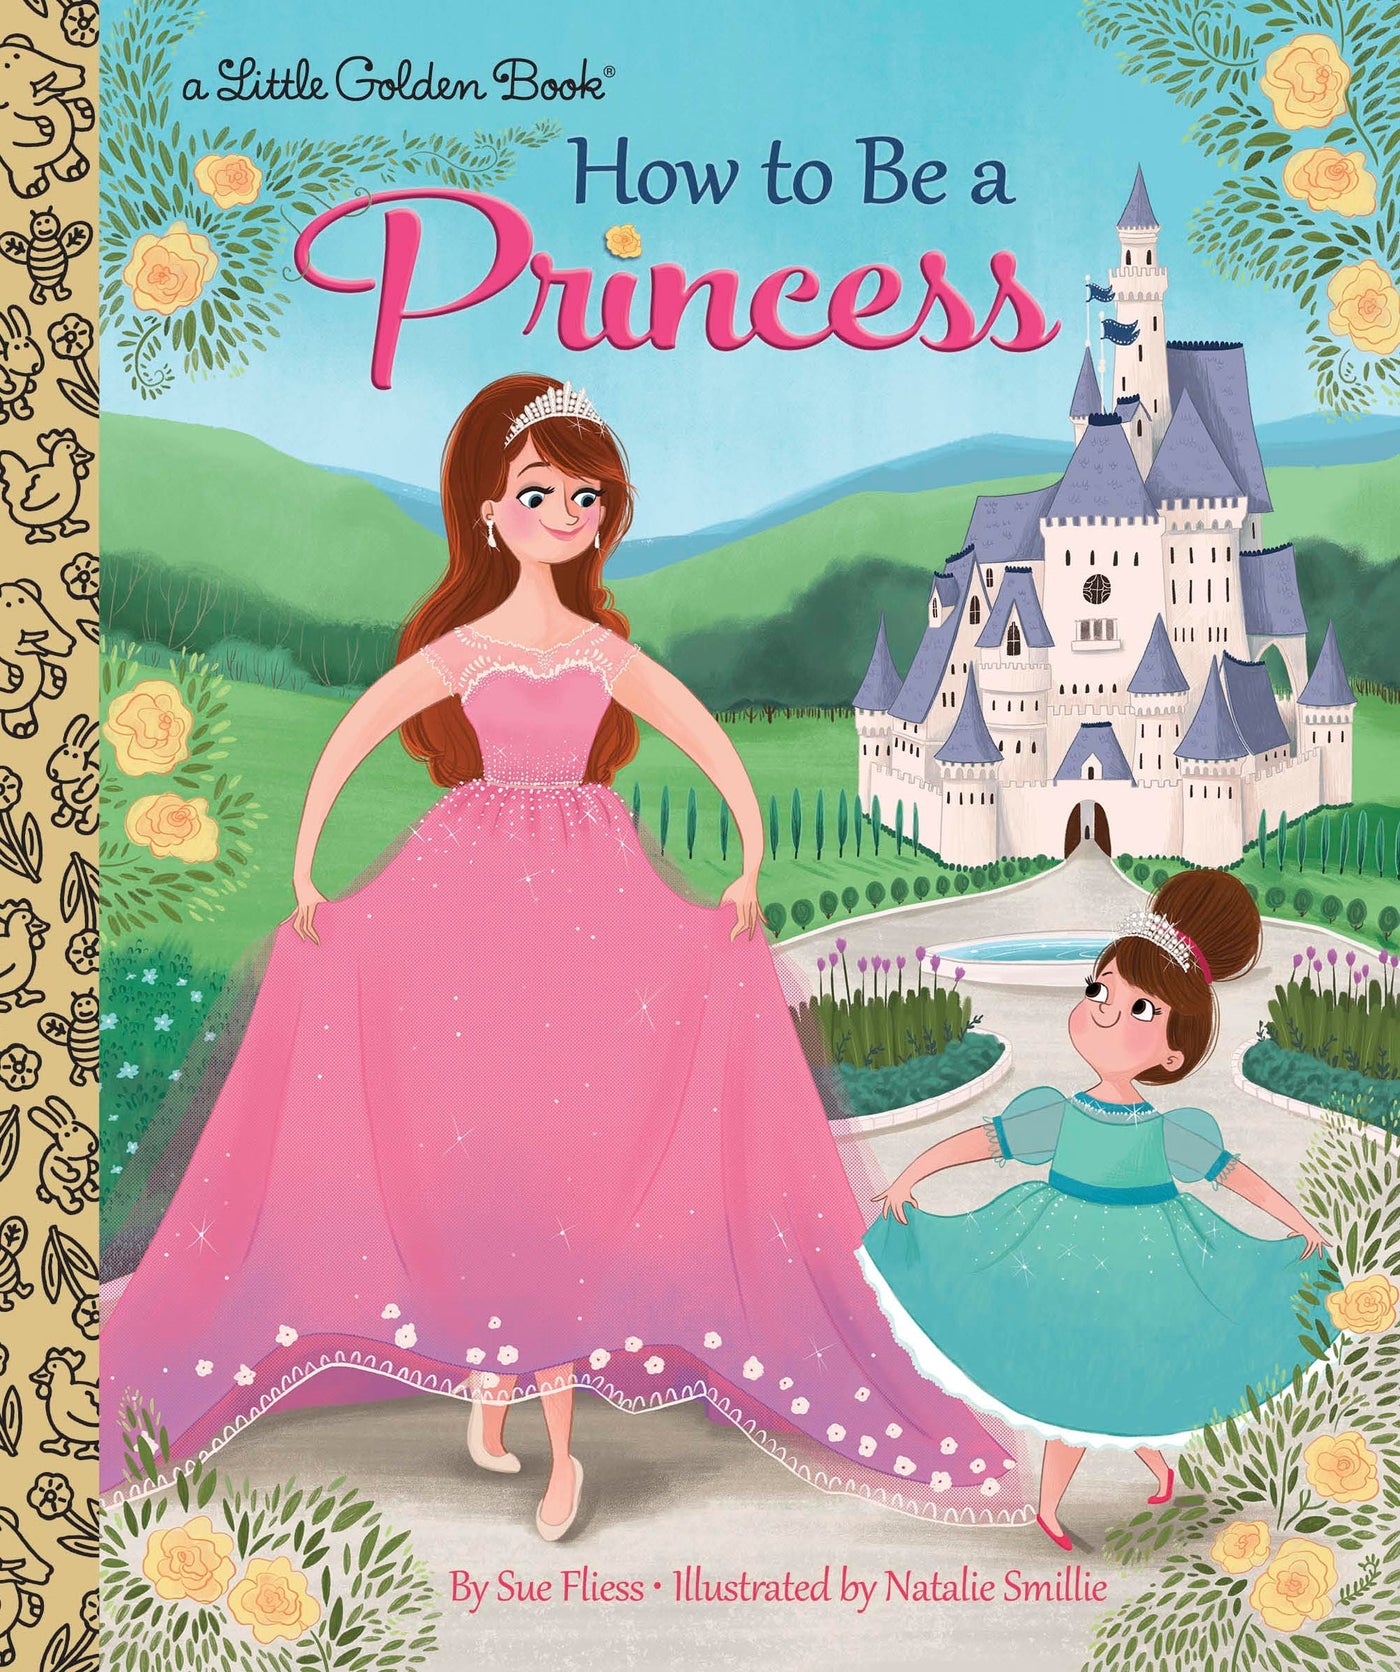 How To Be a Princess